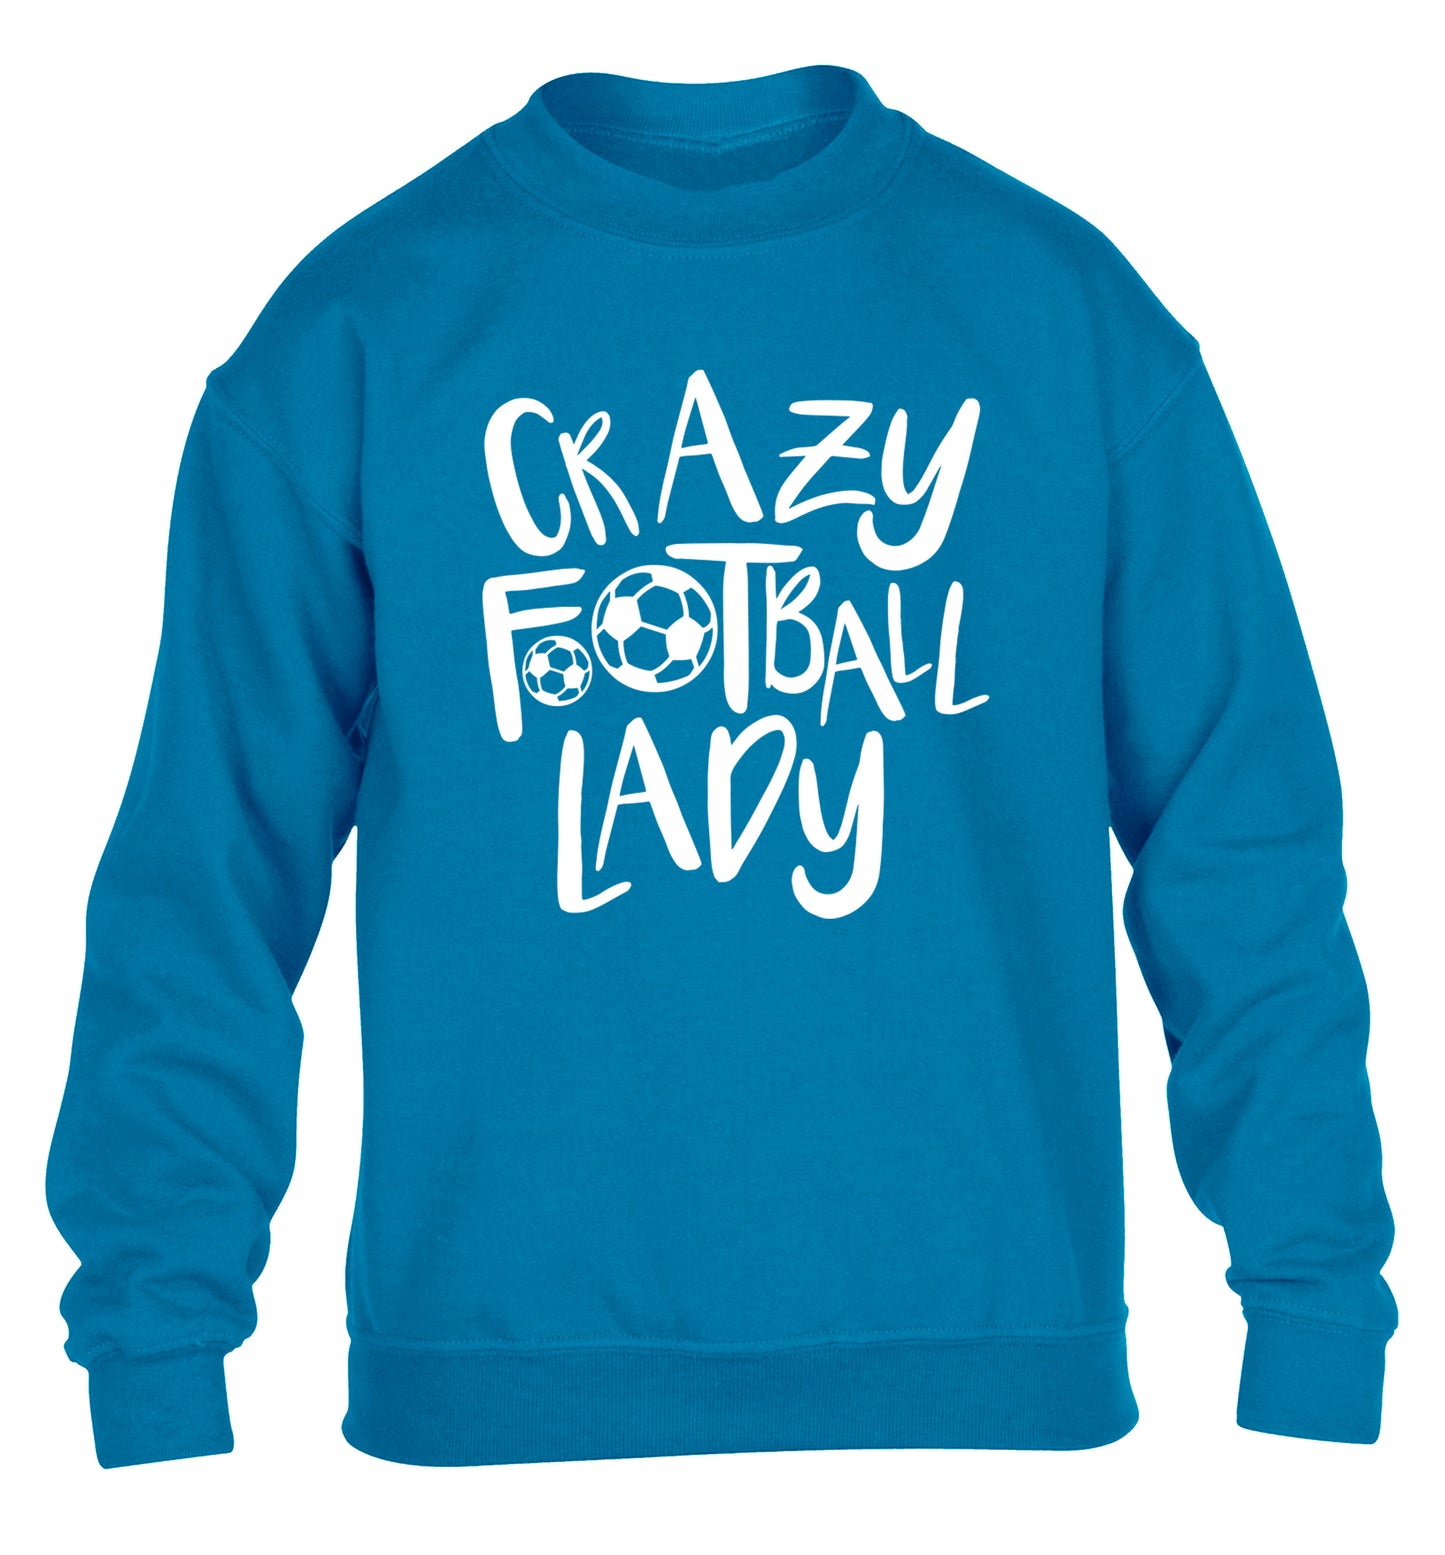 Crazy football lady children's blue sweater 12-14 Years